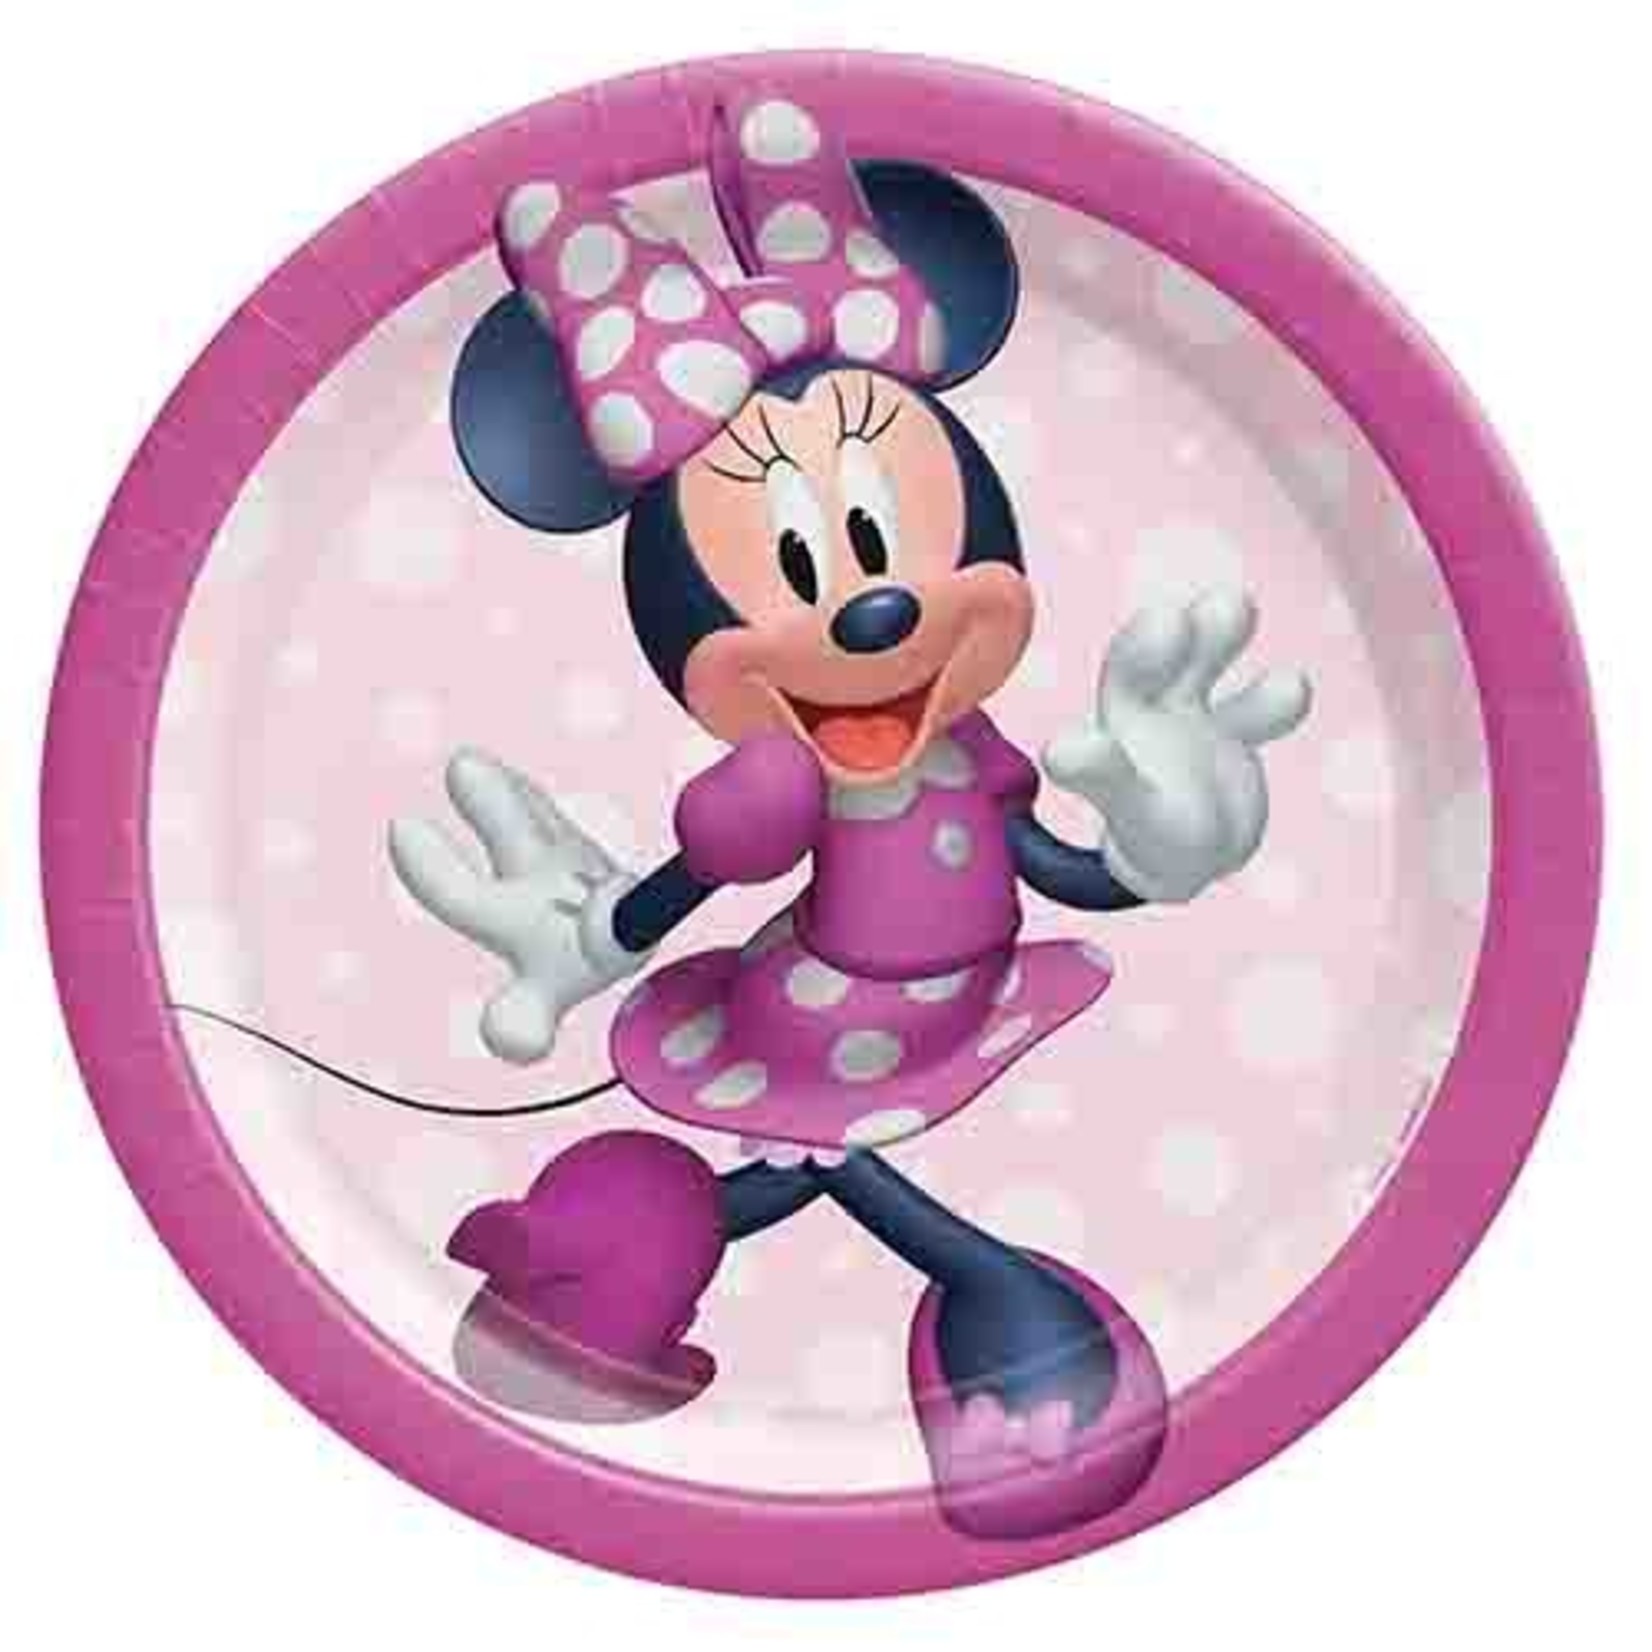 Amscan 7" Minnie Mouse Forever Plates - 8ct.